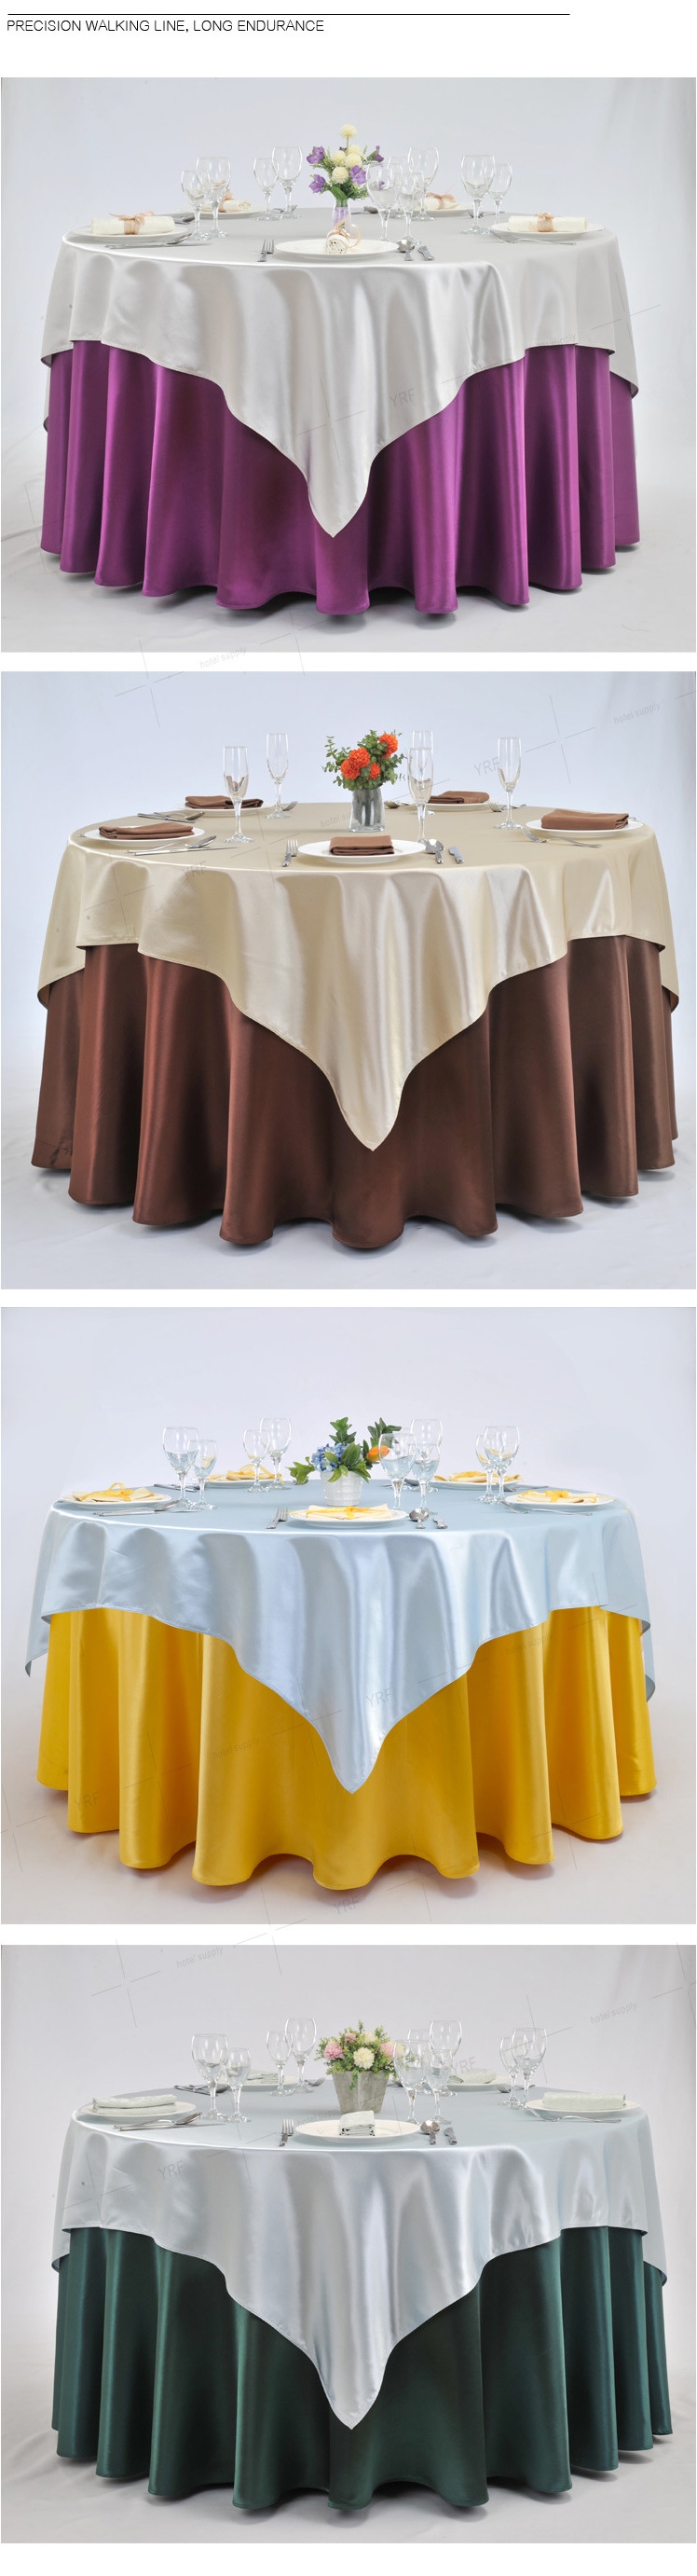 Wholesale Polyester Wedding Tablecloths Table Linens for Sale Round Table Cloths